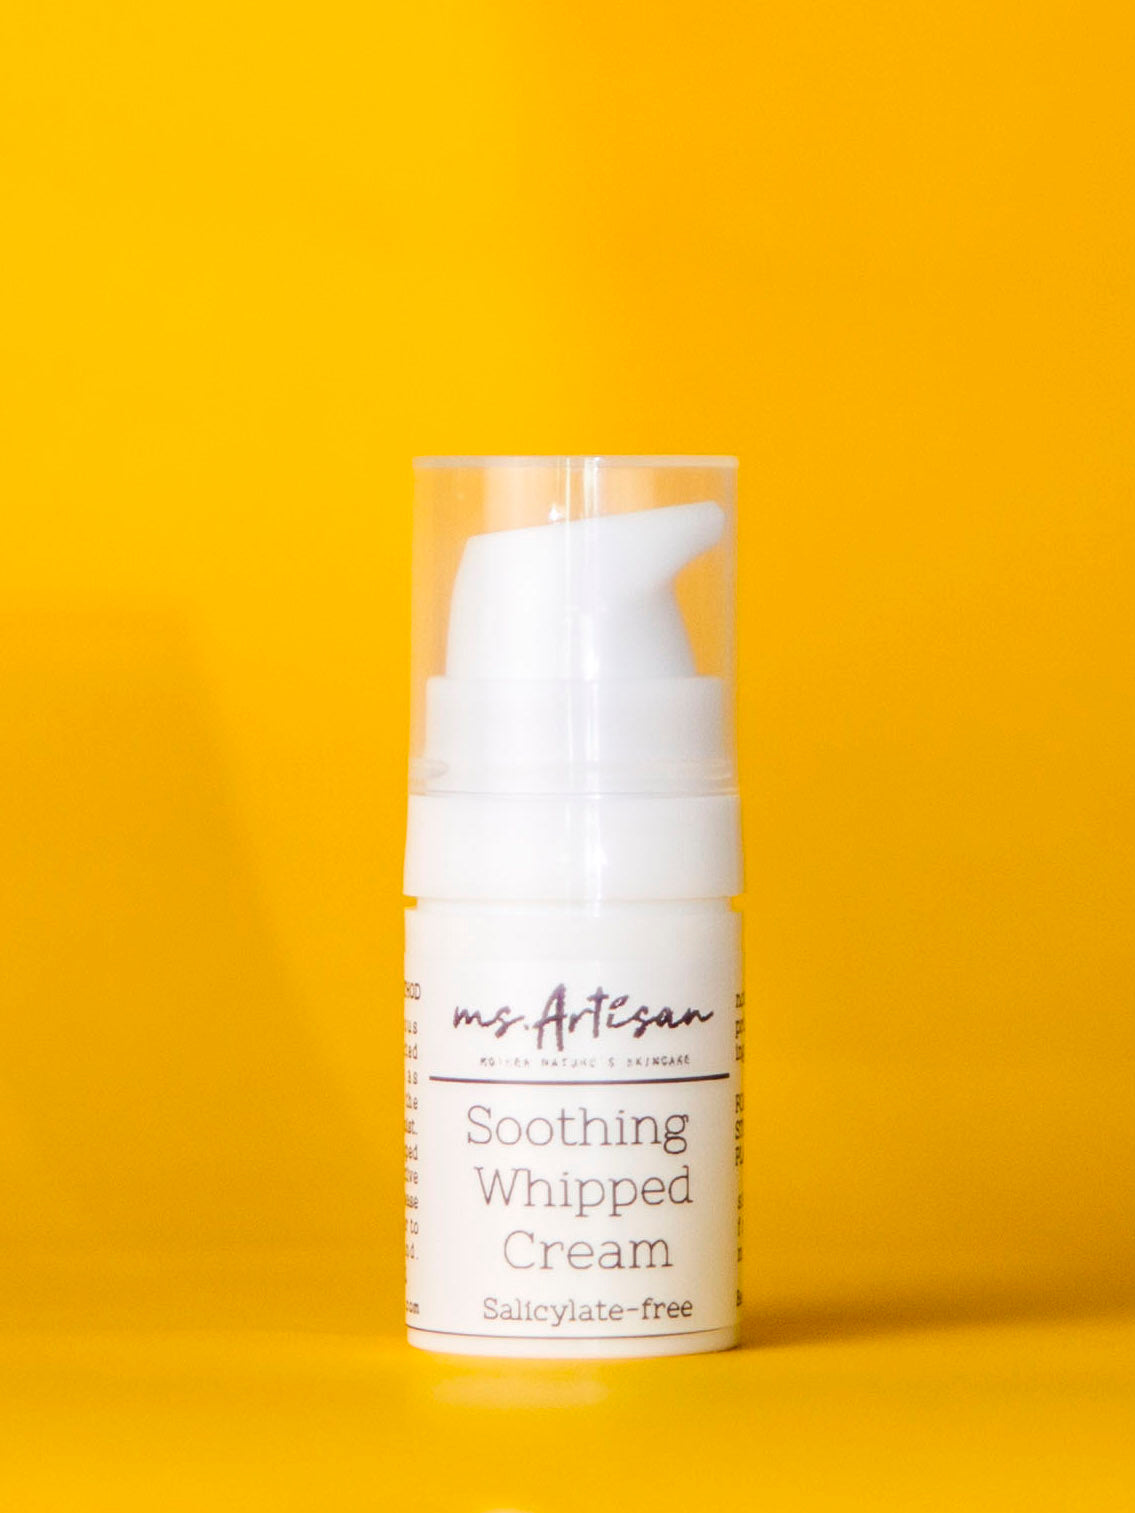 Soothing Whipped Cream Salicylate free (Trial bottle)